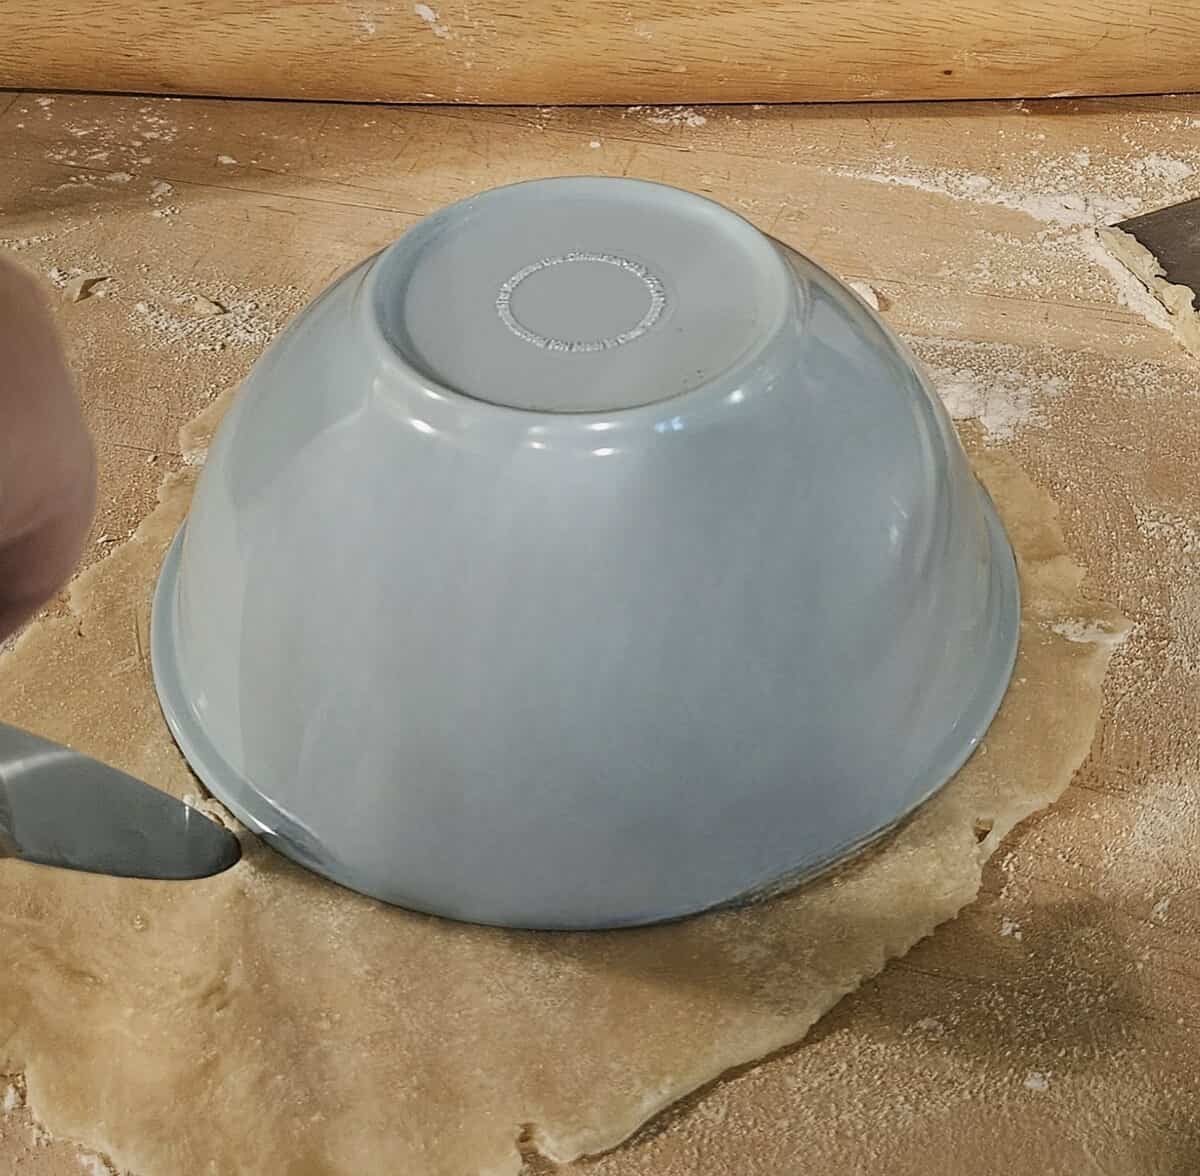 small plastic bowl inverted onto pie crust to use as a cutting guide for round pieces